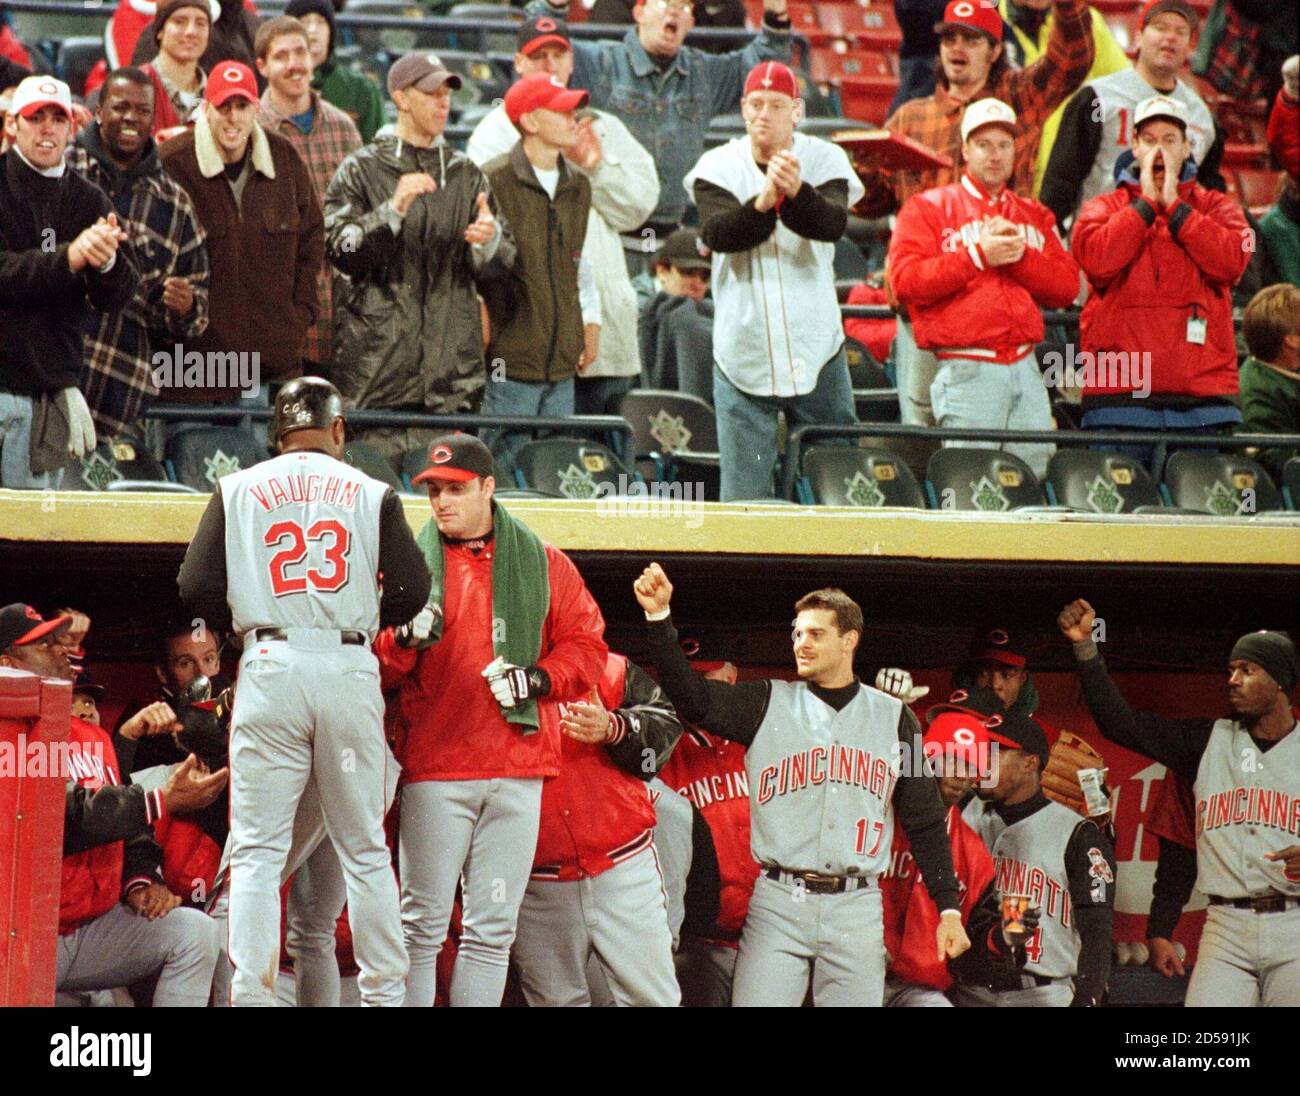 Cincinnati Reds' slugger Greg Vaughn (23) is greeted by players and fans after hitting a three-run home run off Milwaukee Brewers pitcher Cal Elred in the third inning at Milwaukee County Stadium October 3.  AF/SV Stock Photo